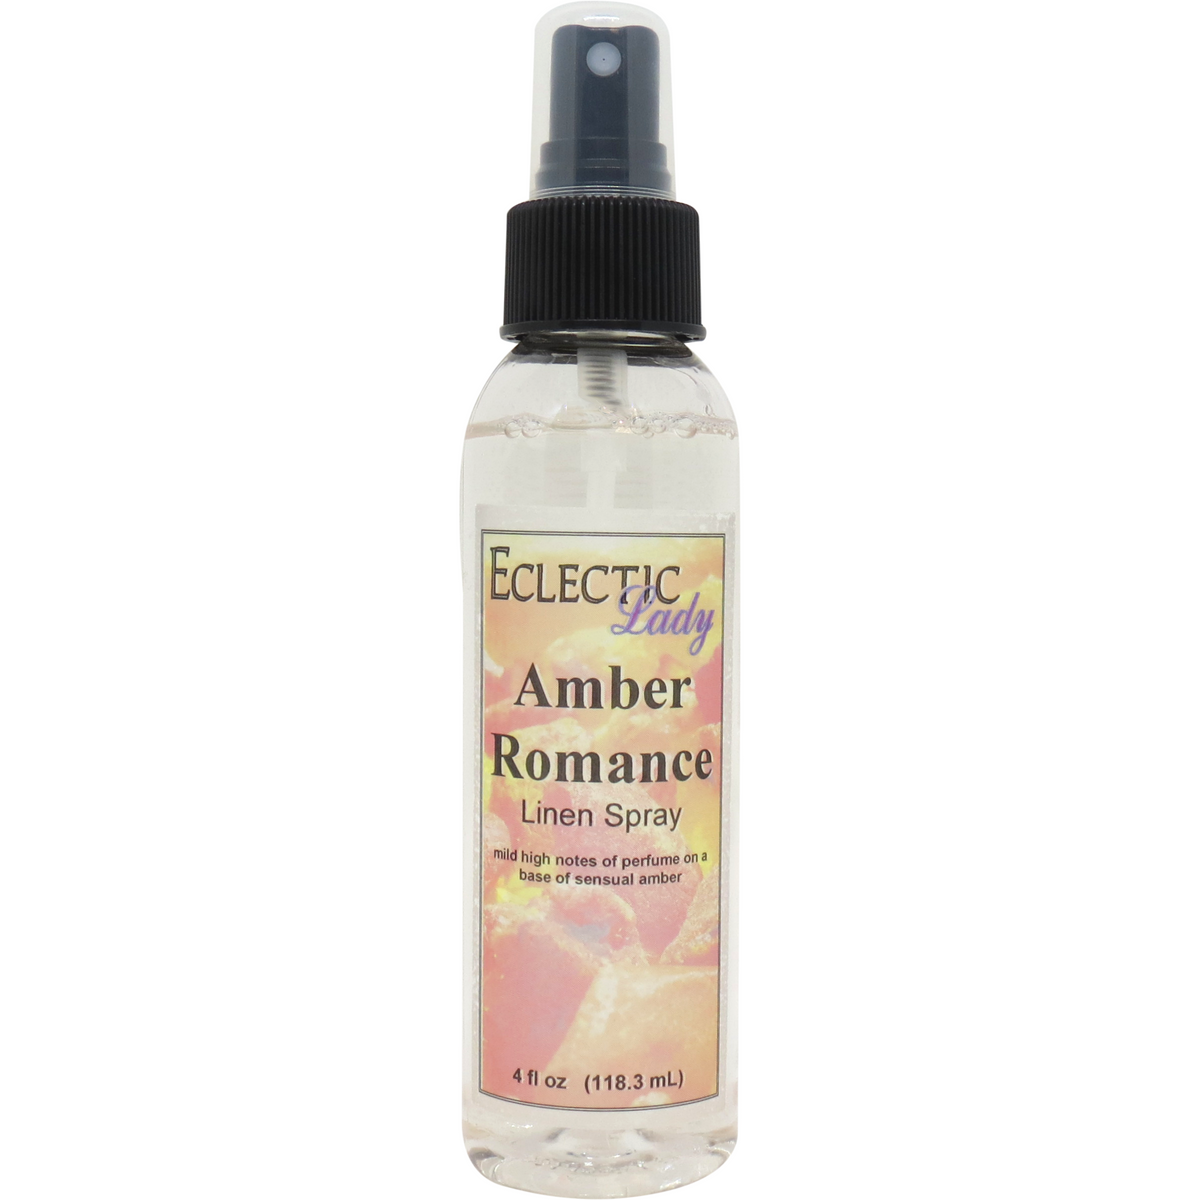 Amber Romance Linen and Sheet Spray - No Artificial Colors, Parabens, or Preservatives - Long-Lasting Scent for Bed, Fabric & Pillow 2 oz Double